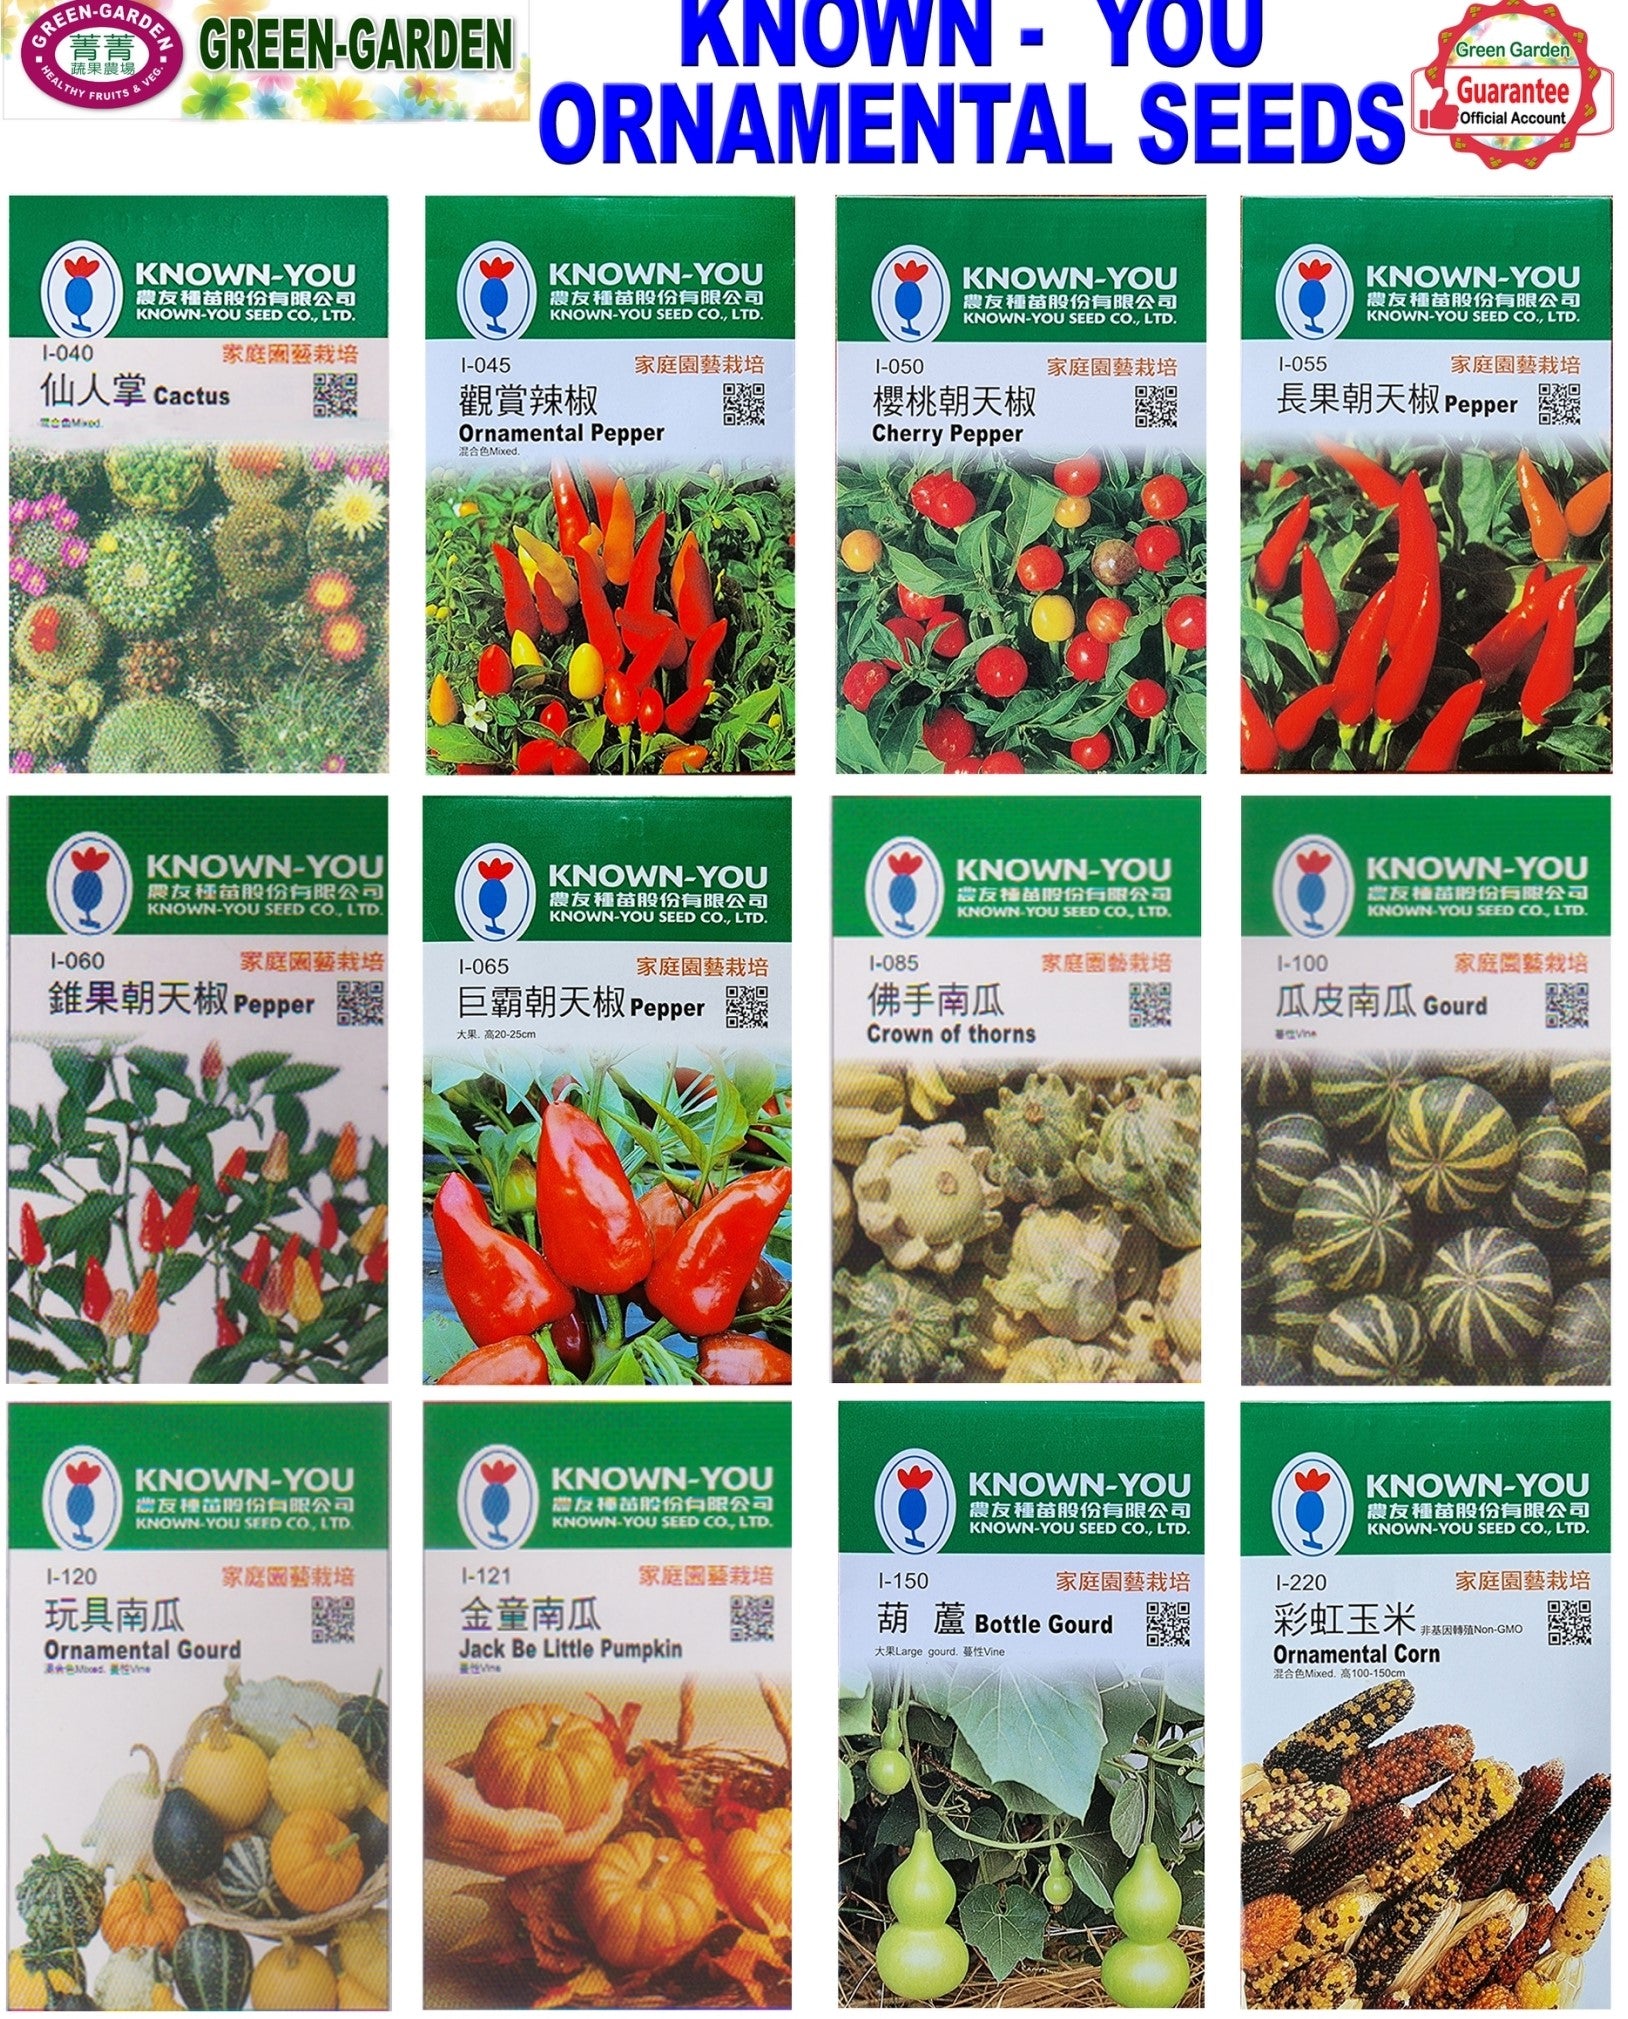 Known You Ornamental Seeds (I-050 Cherry Pepper)